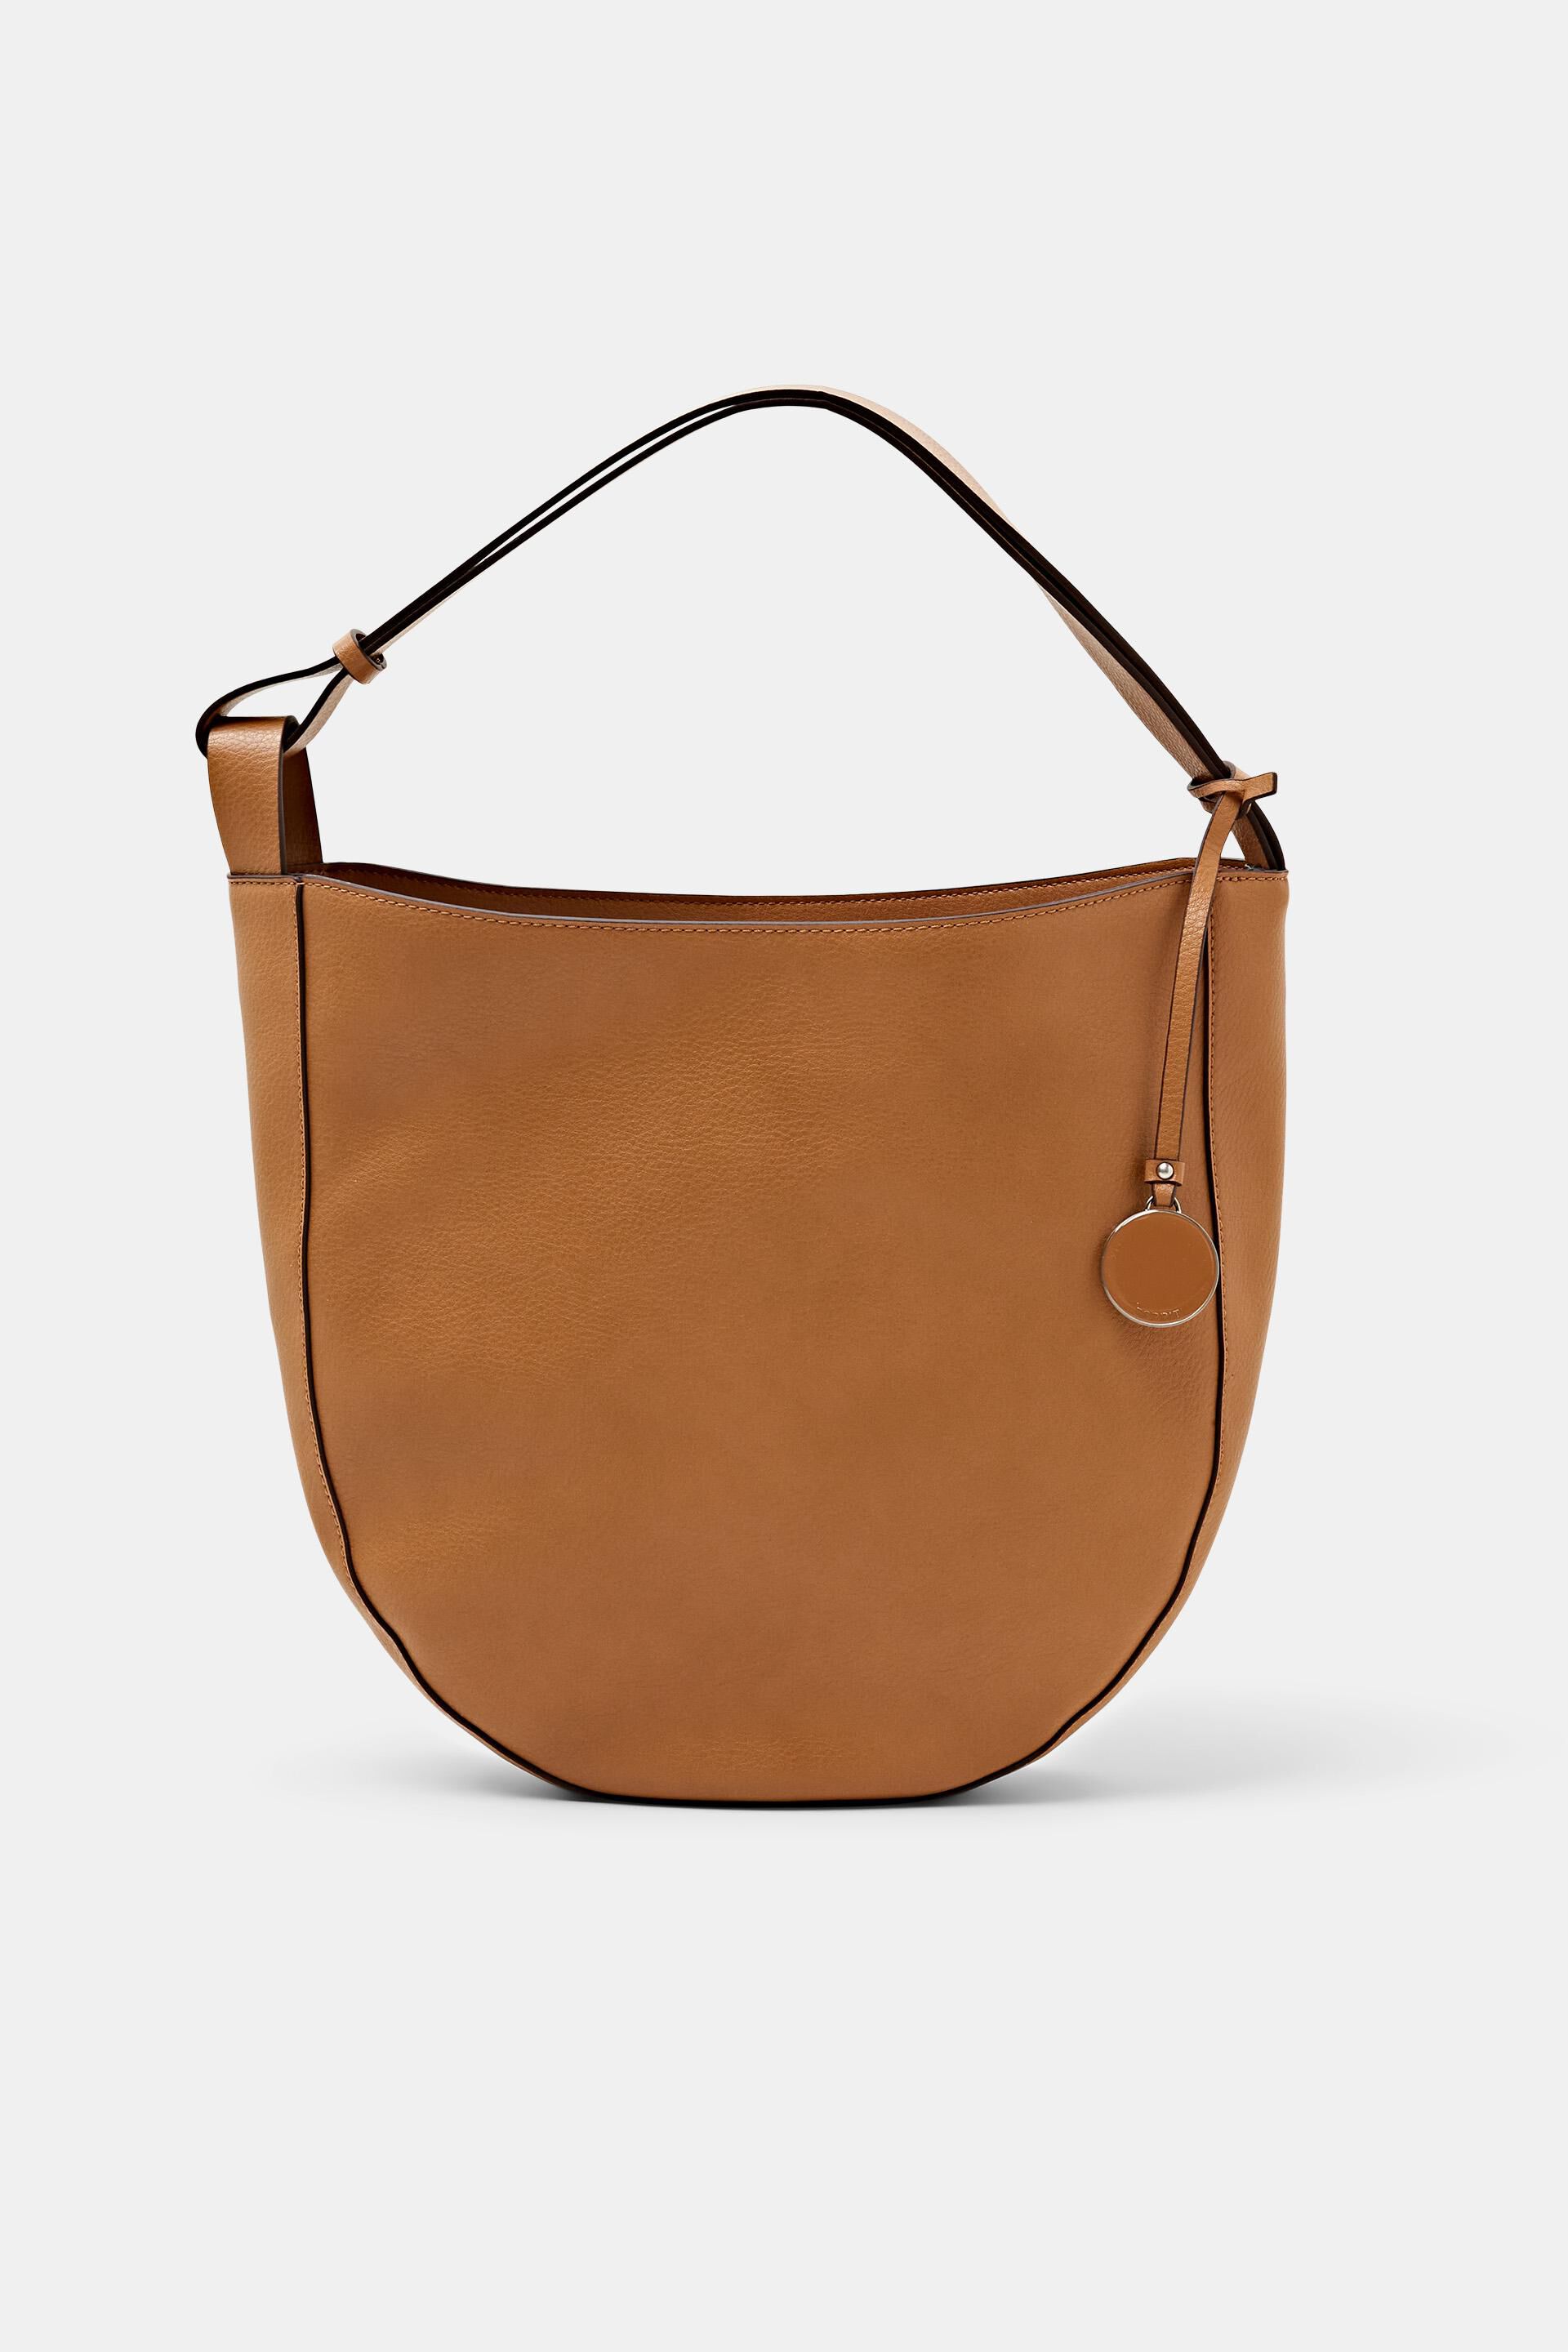 Esprit bag Recycled: leather faux hobo